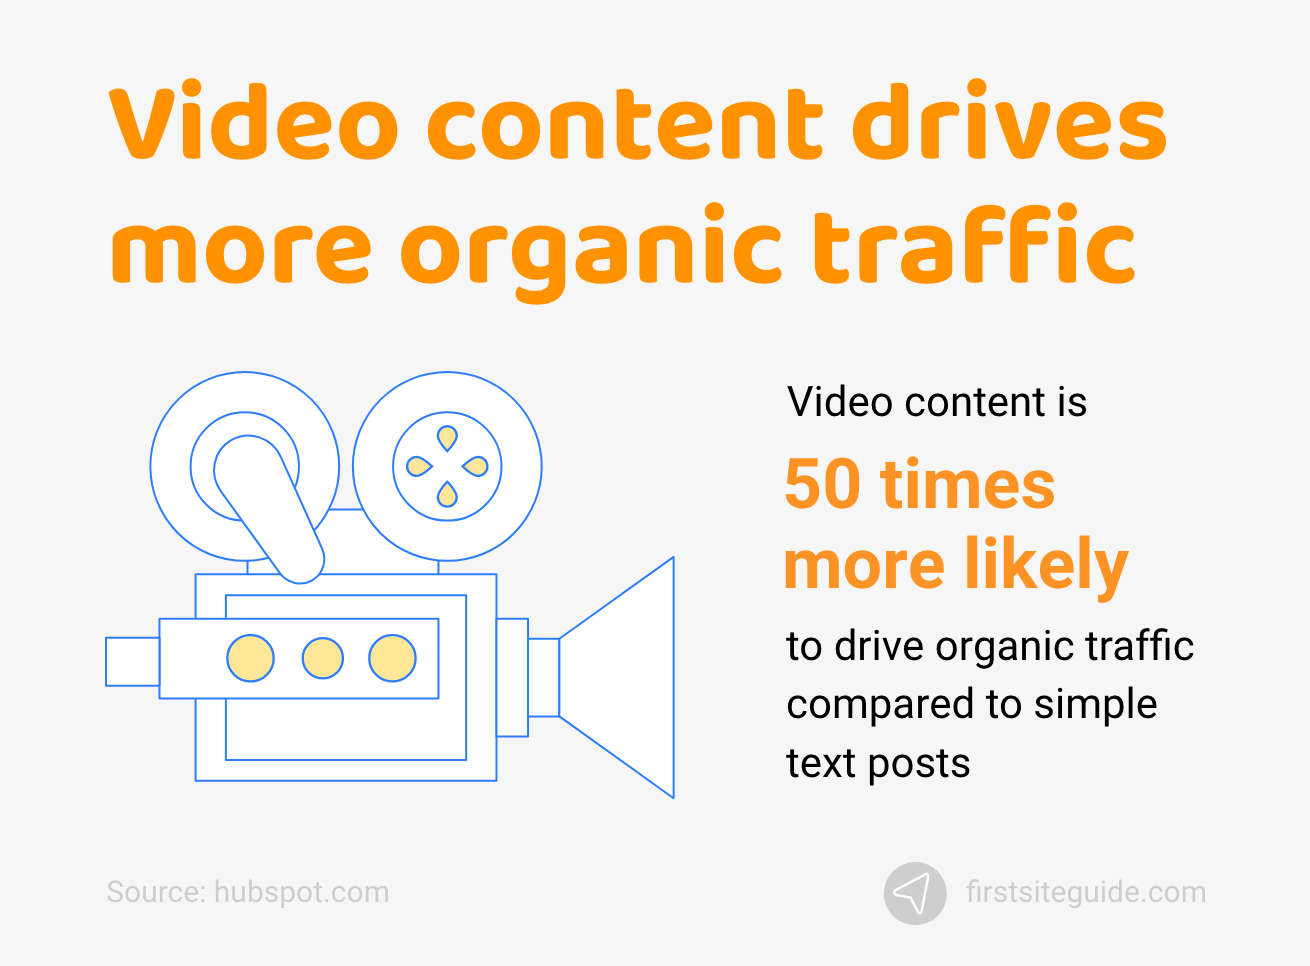 Video content drives more organic traffic